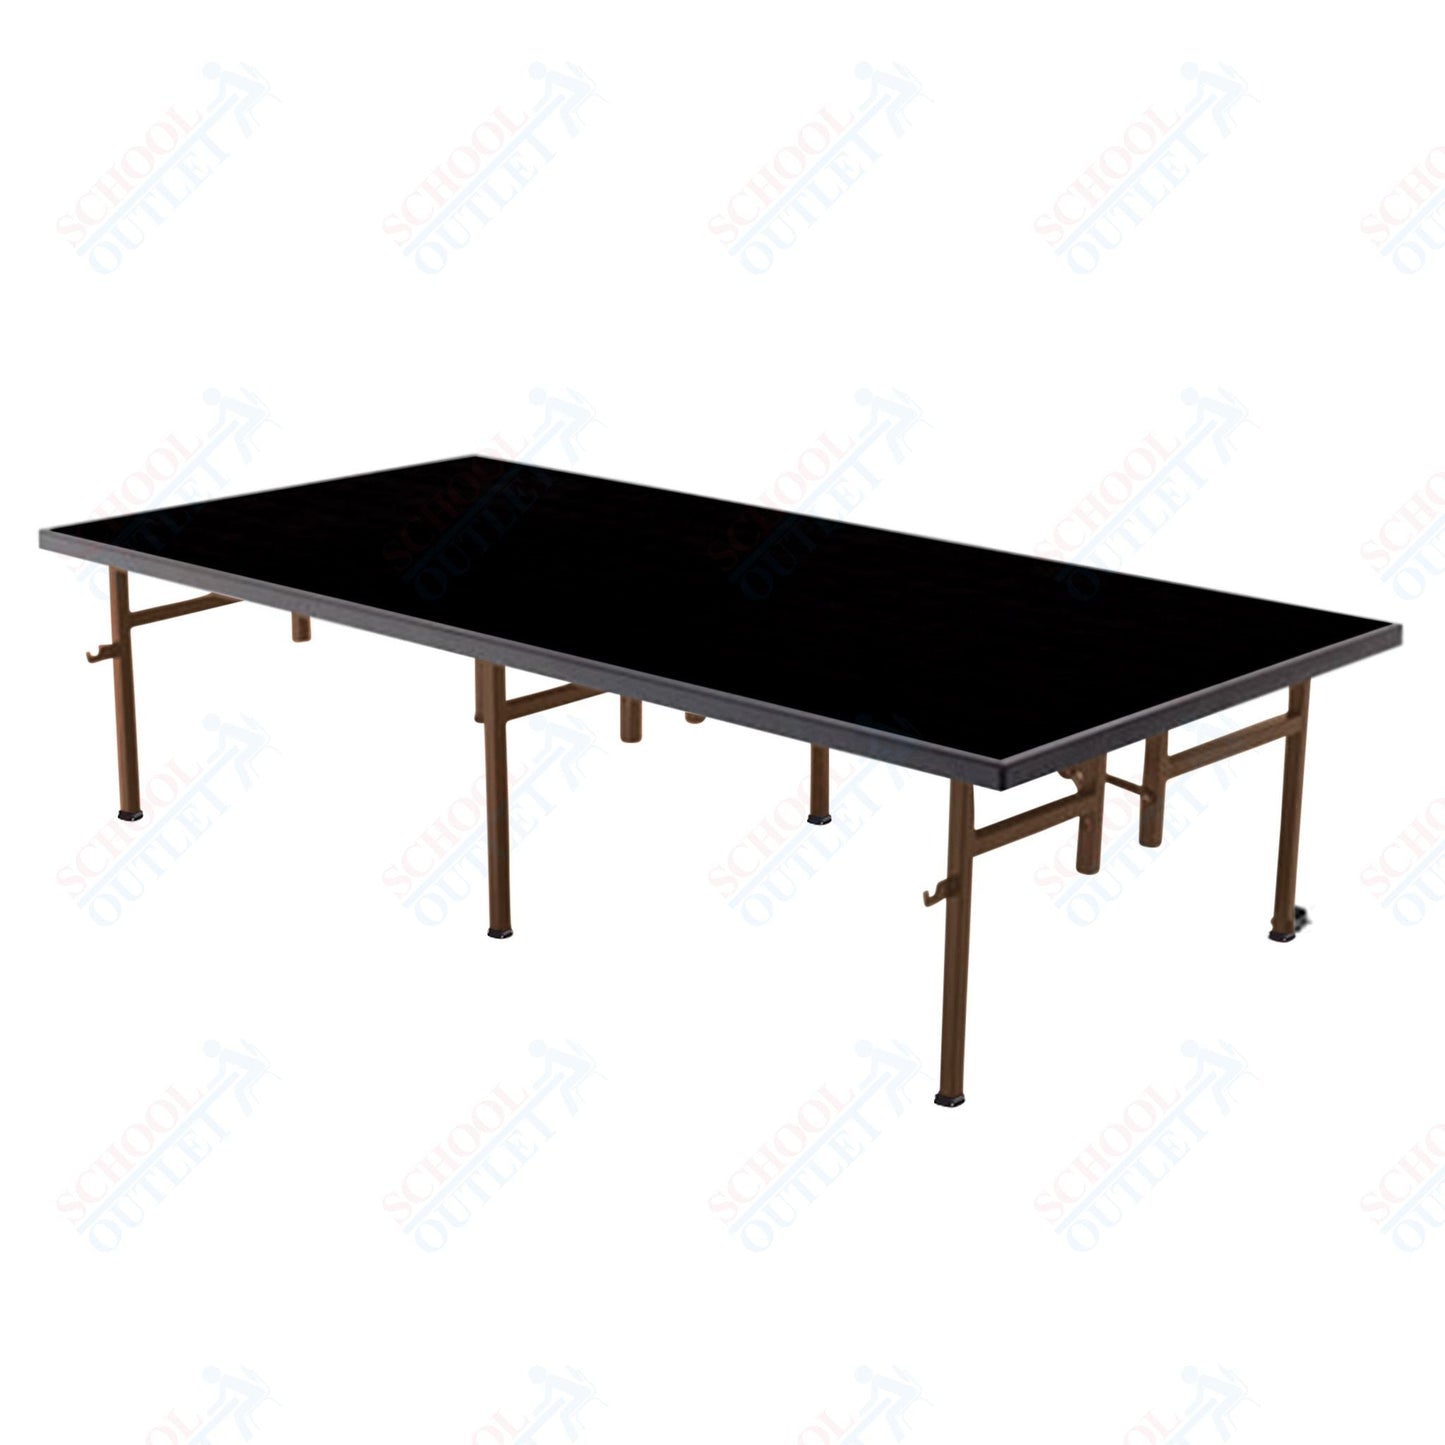 AmTab Fixed Height Stage - Polypropylene Top - 48"W x 72"L x 16"H (AmTab AMT - ST4616P) - SchoolOutlet